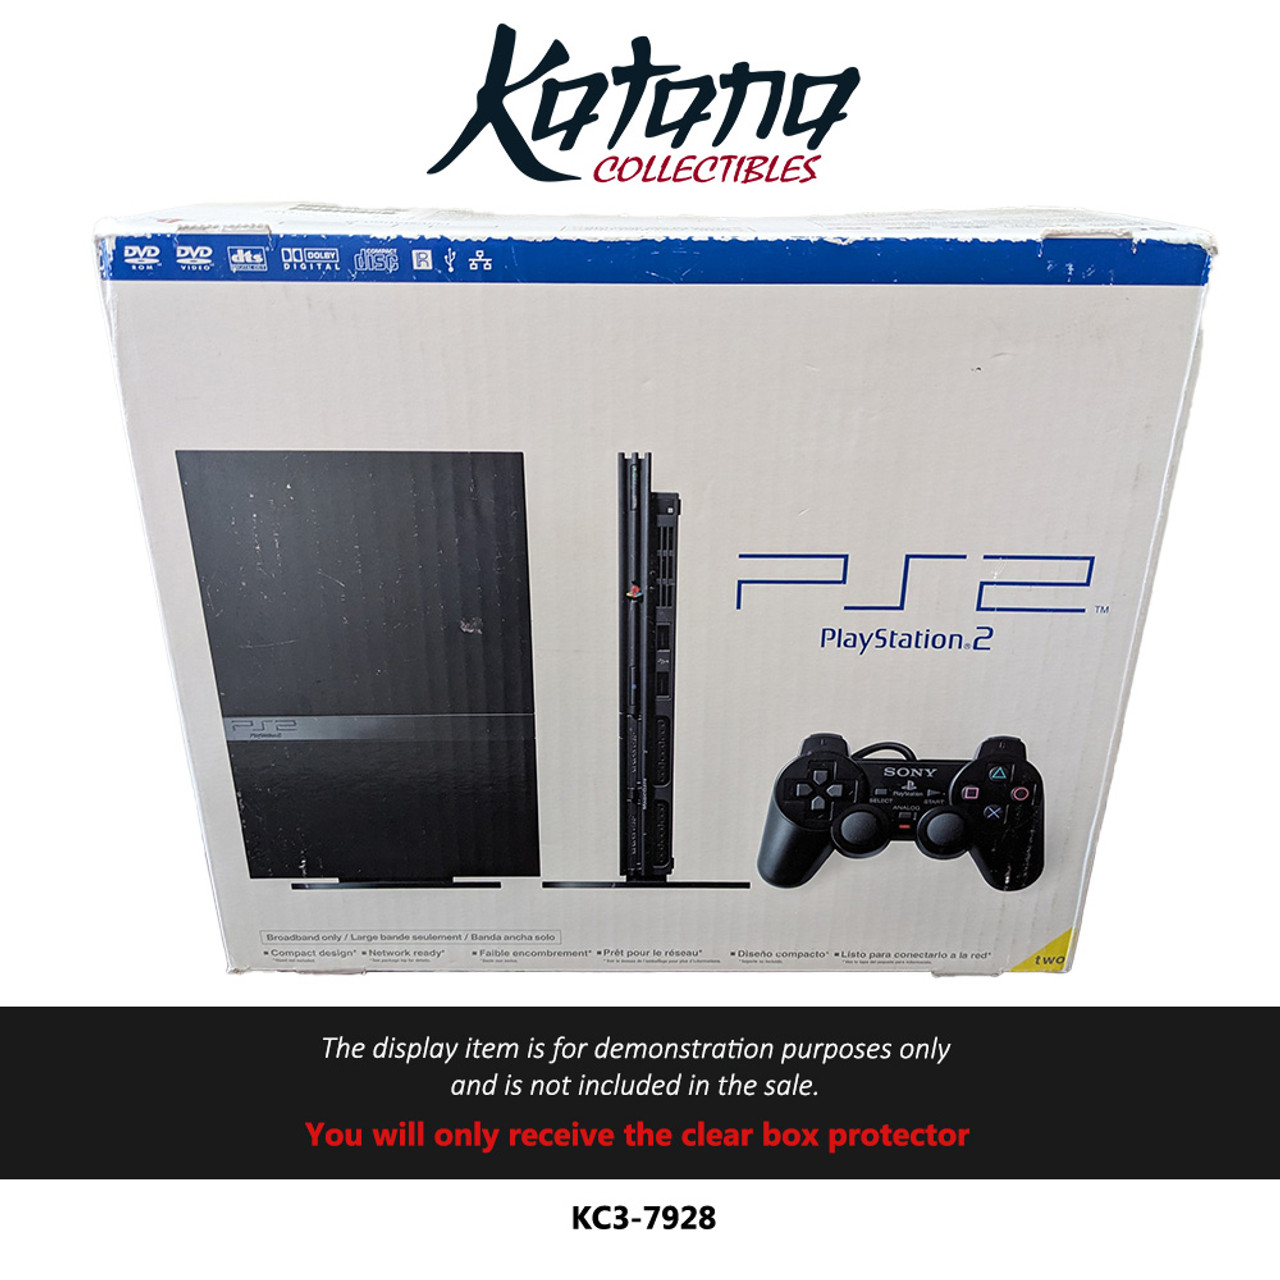 Protector For Sony Playstation 2 Slim (SCPH-70000 Series) Console Box -  North America